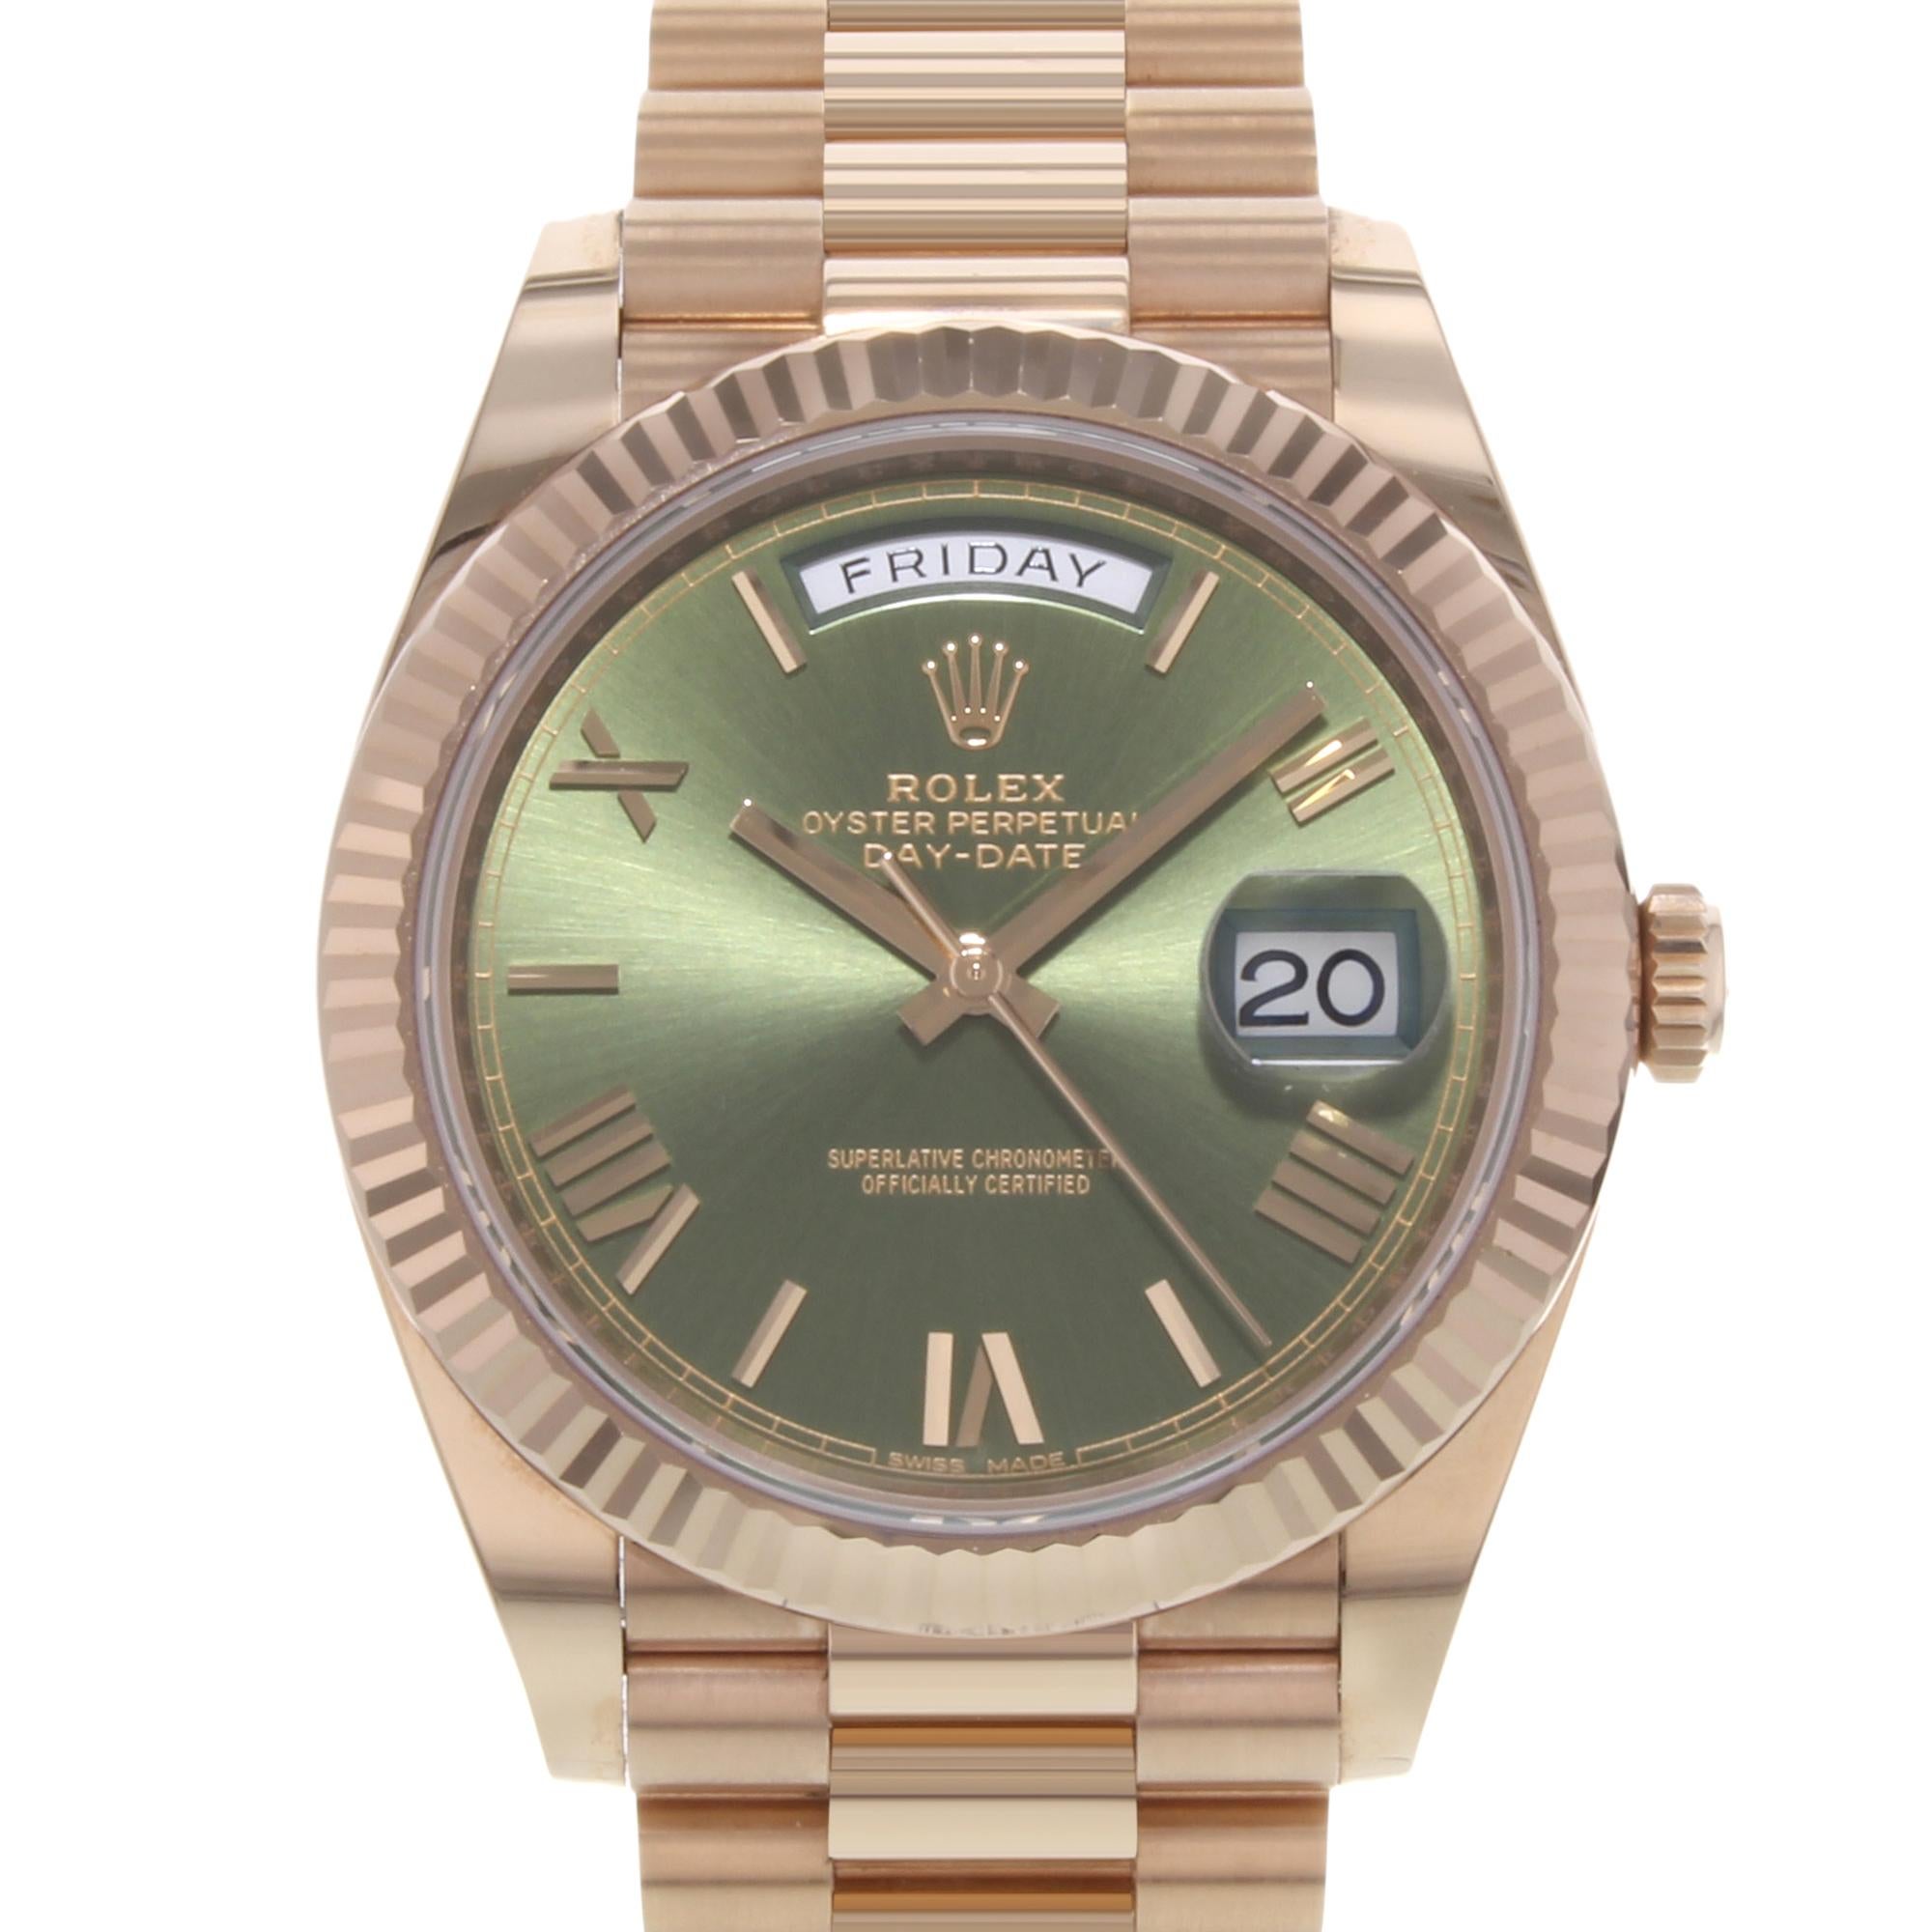 This  never been worn  Rolex  Day-Date 40 228235  is a beautiful men's timepiece that is powered by mechanical (automatic) movement which is cased in a rose gold case. It has a round shape face, day & date dial and has hand roman numerals, sticks